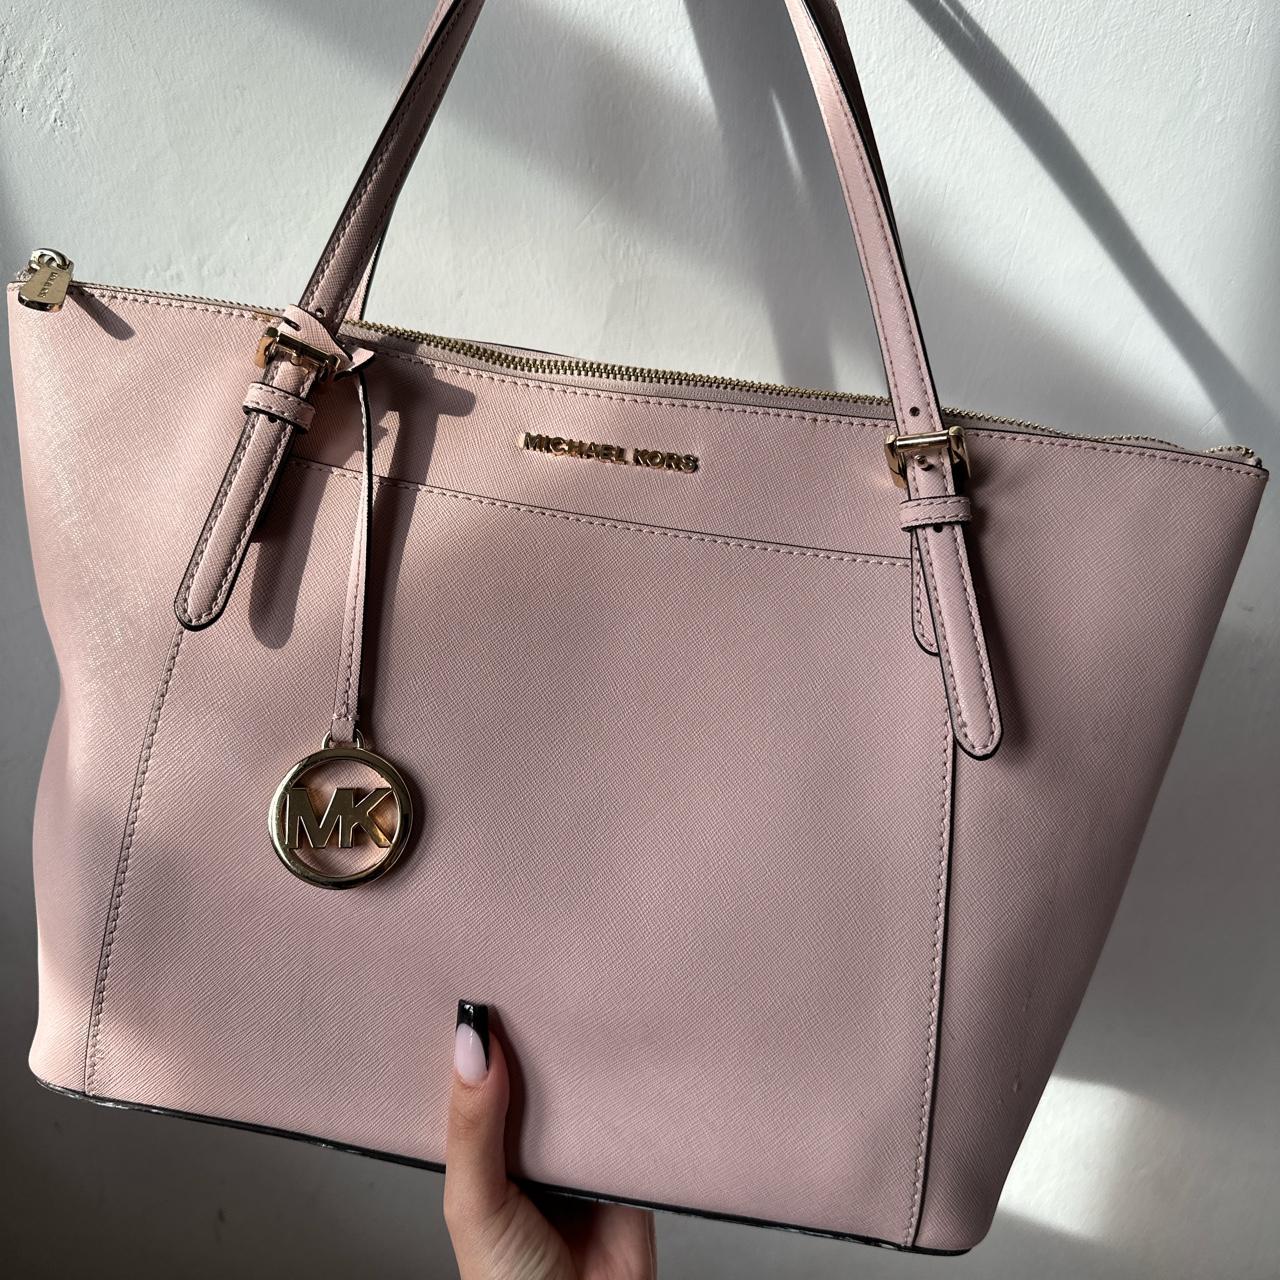 Michael Kors baby pink tote purse | Pink tote, Tote purse, Purses